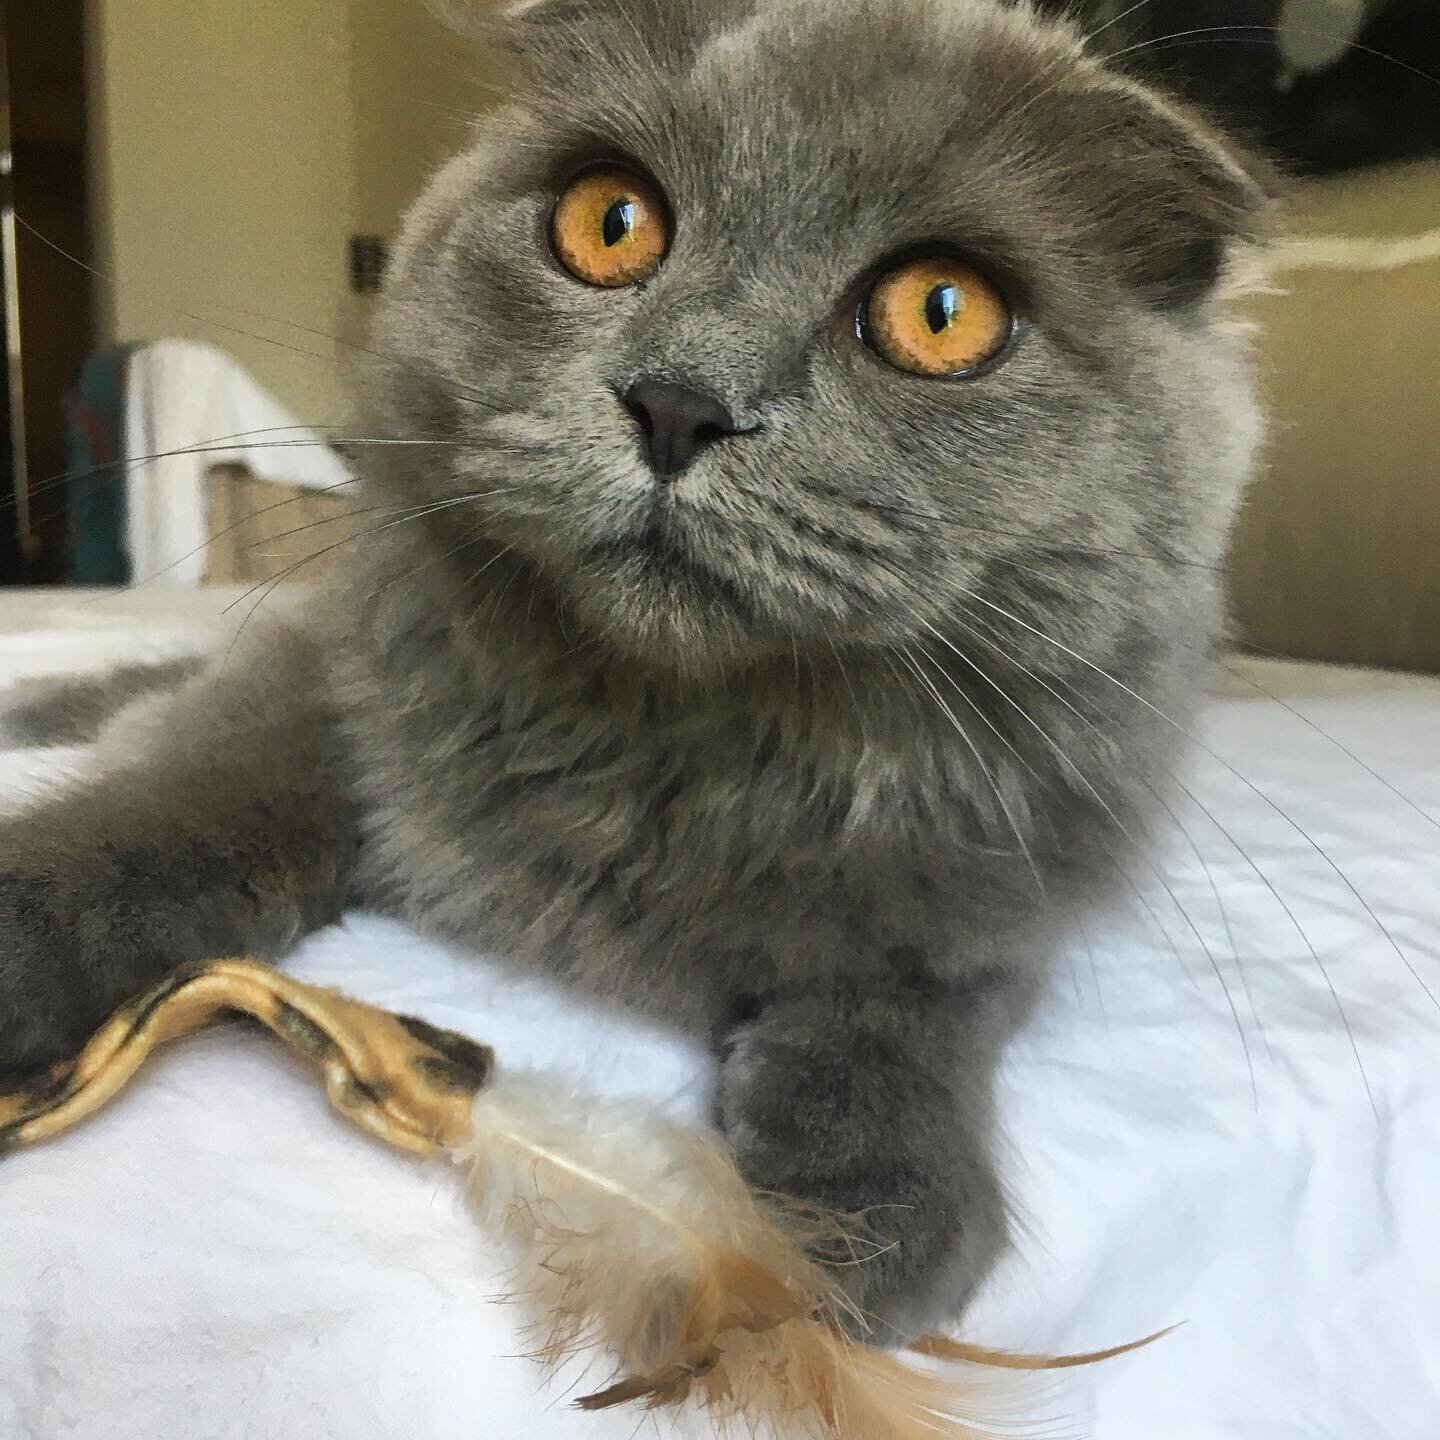 Orlando... this little prince took 5 days to come out from under the bed... but we got there in the end 🏆 💙 #shycat #scottishfold #bluecats #bluecatsofinstagram #dubaicat #dubaicats